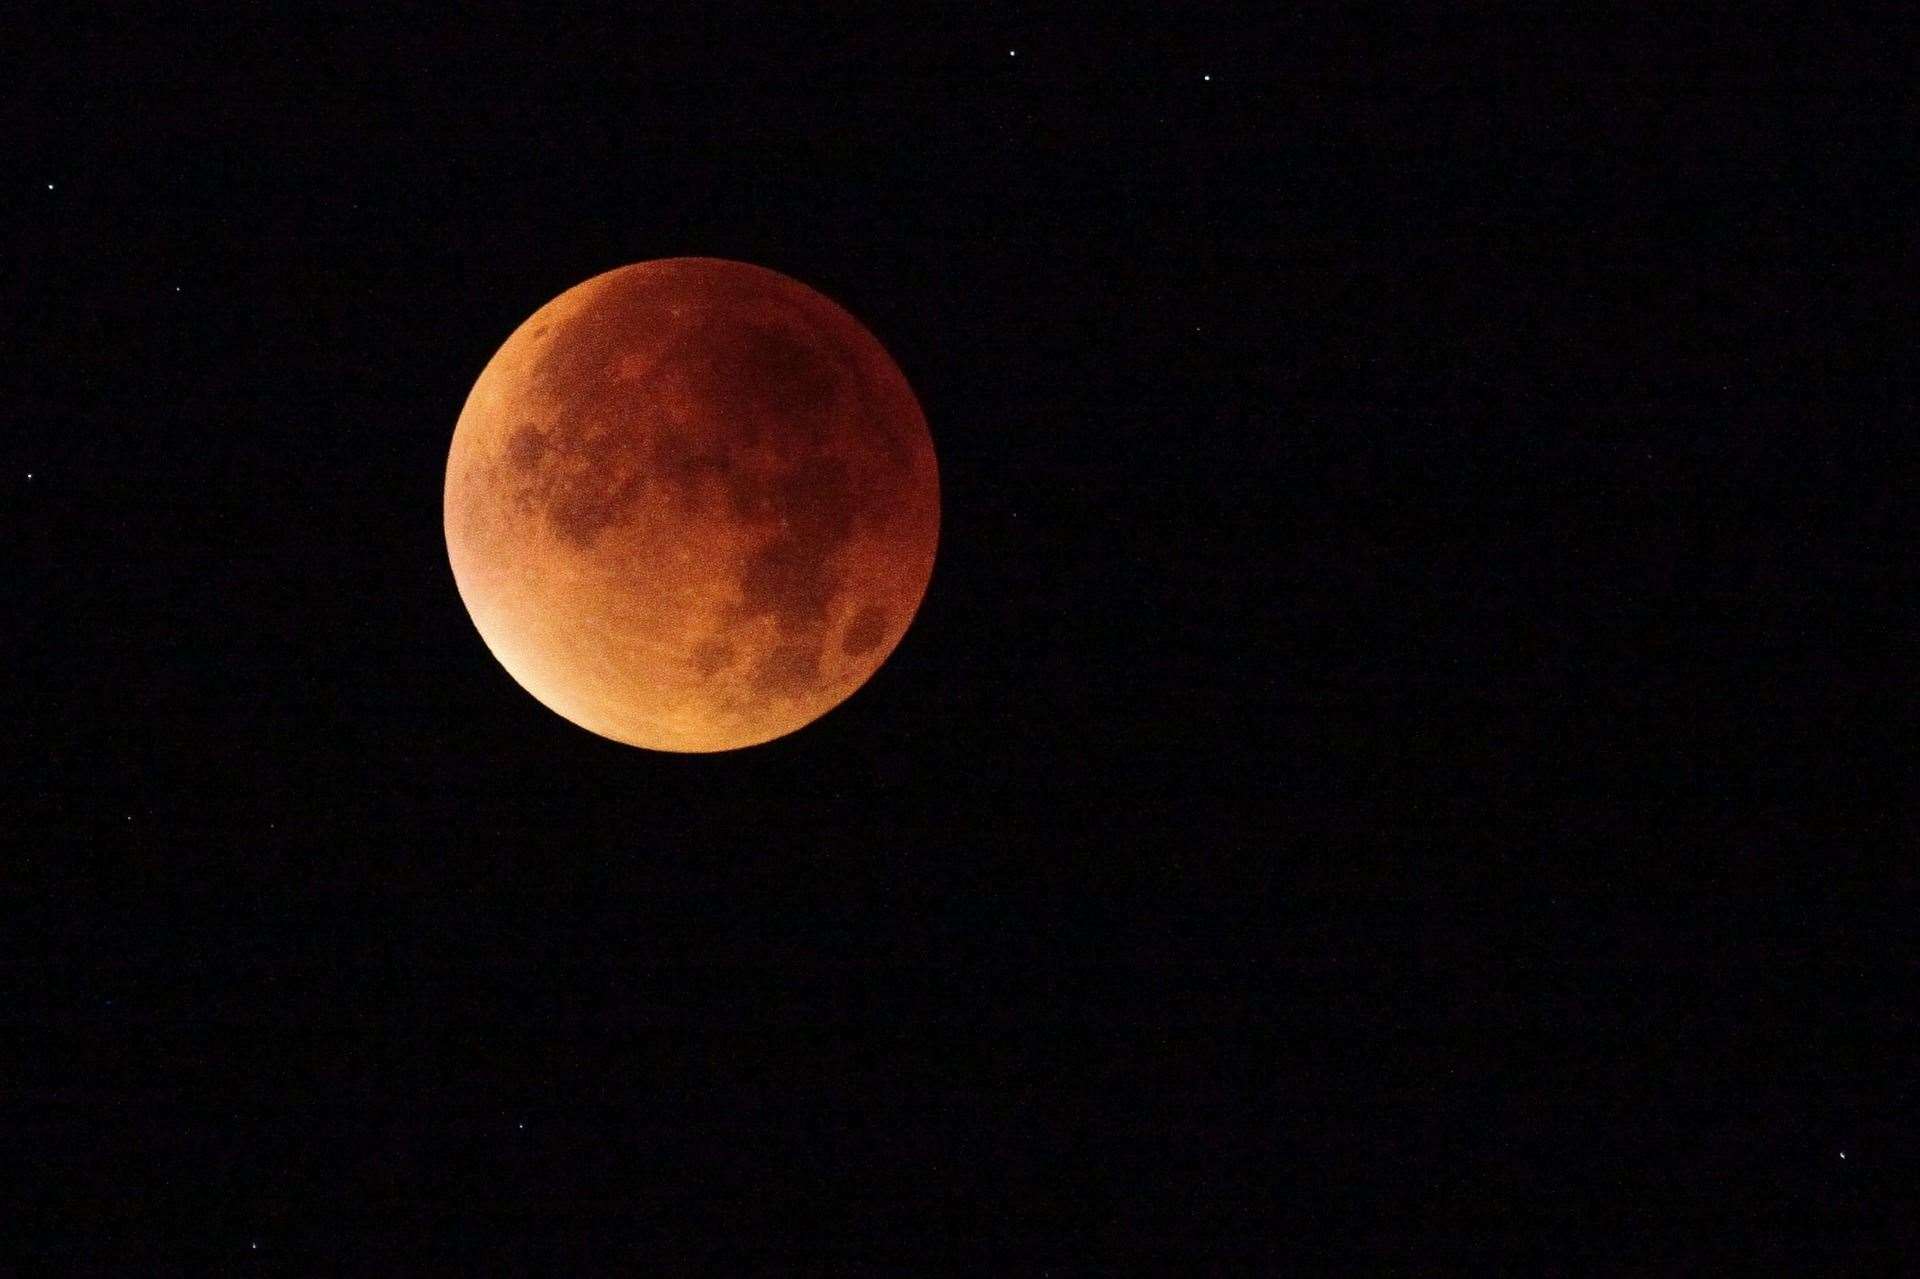 A partial lunar eclipse could make the moon appear red